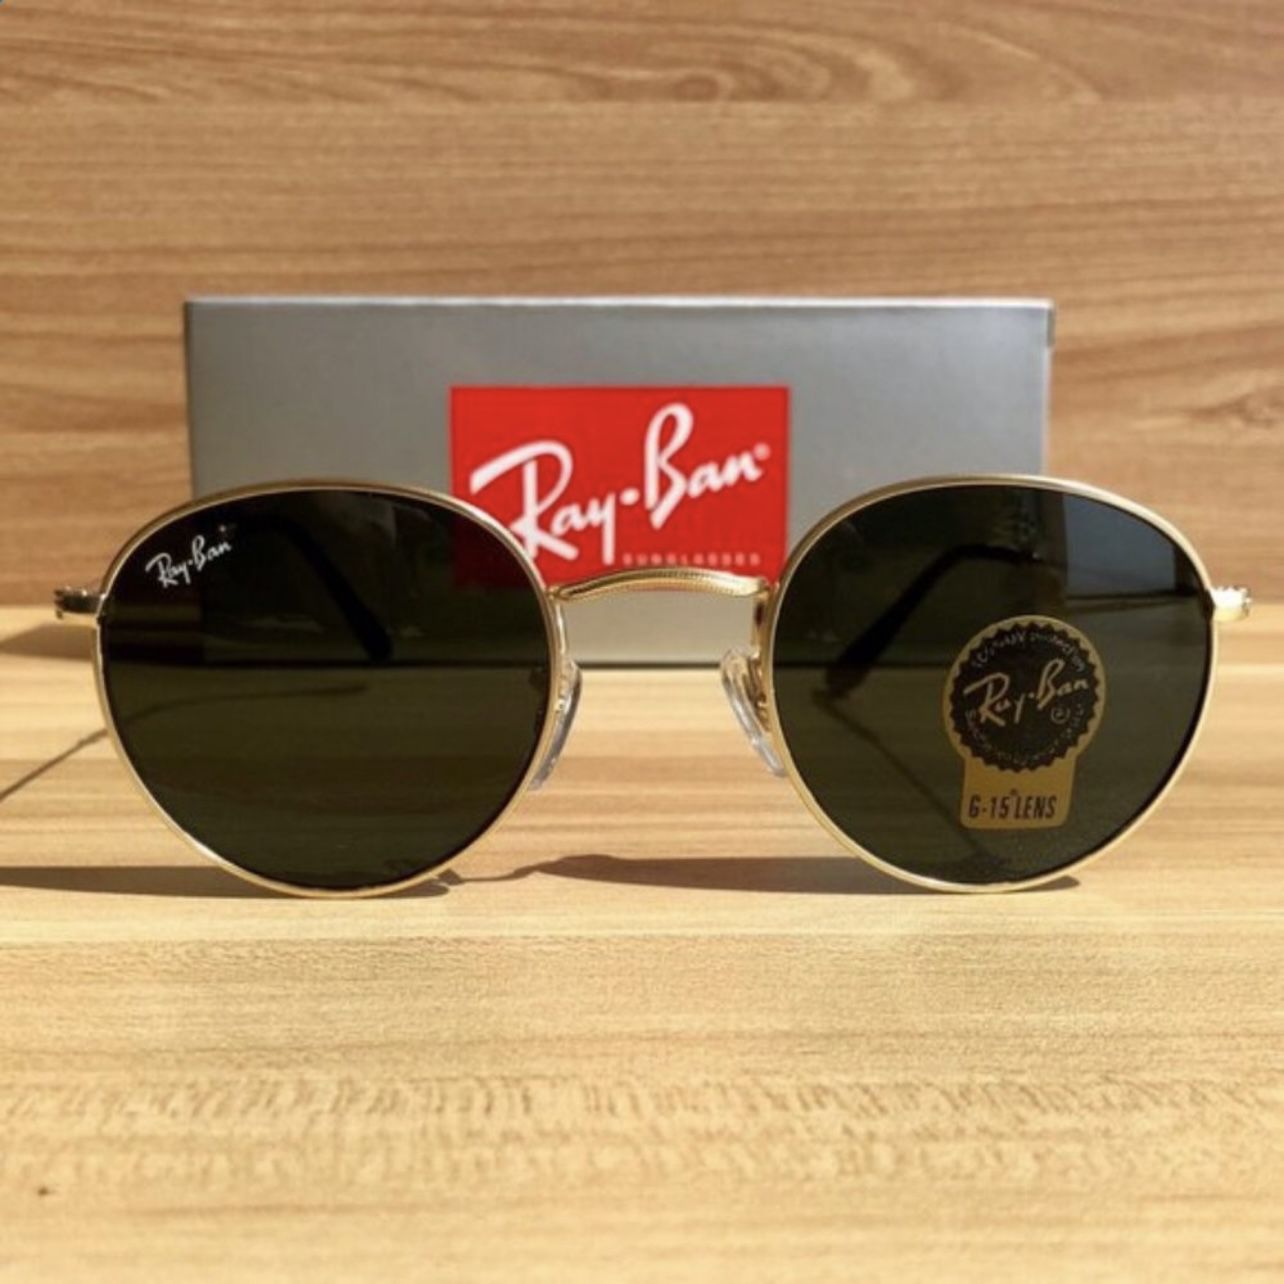 Ray Ban Black Classic real glass lenses Round Gold Frame Pilot style Unisex Standard size 50mm w/Accessories Like New